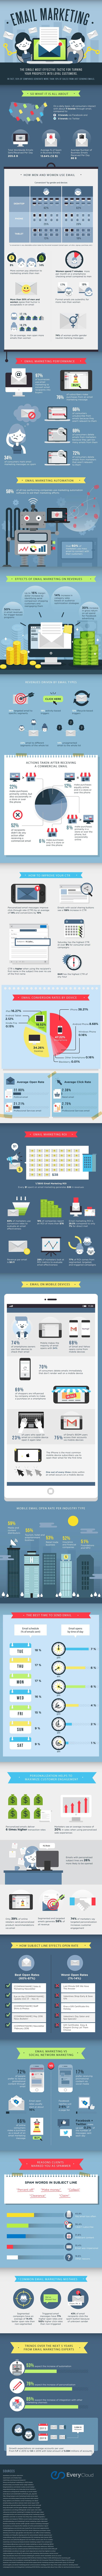 190214-infographic-email-marketing-everycloud